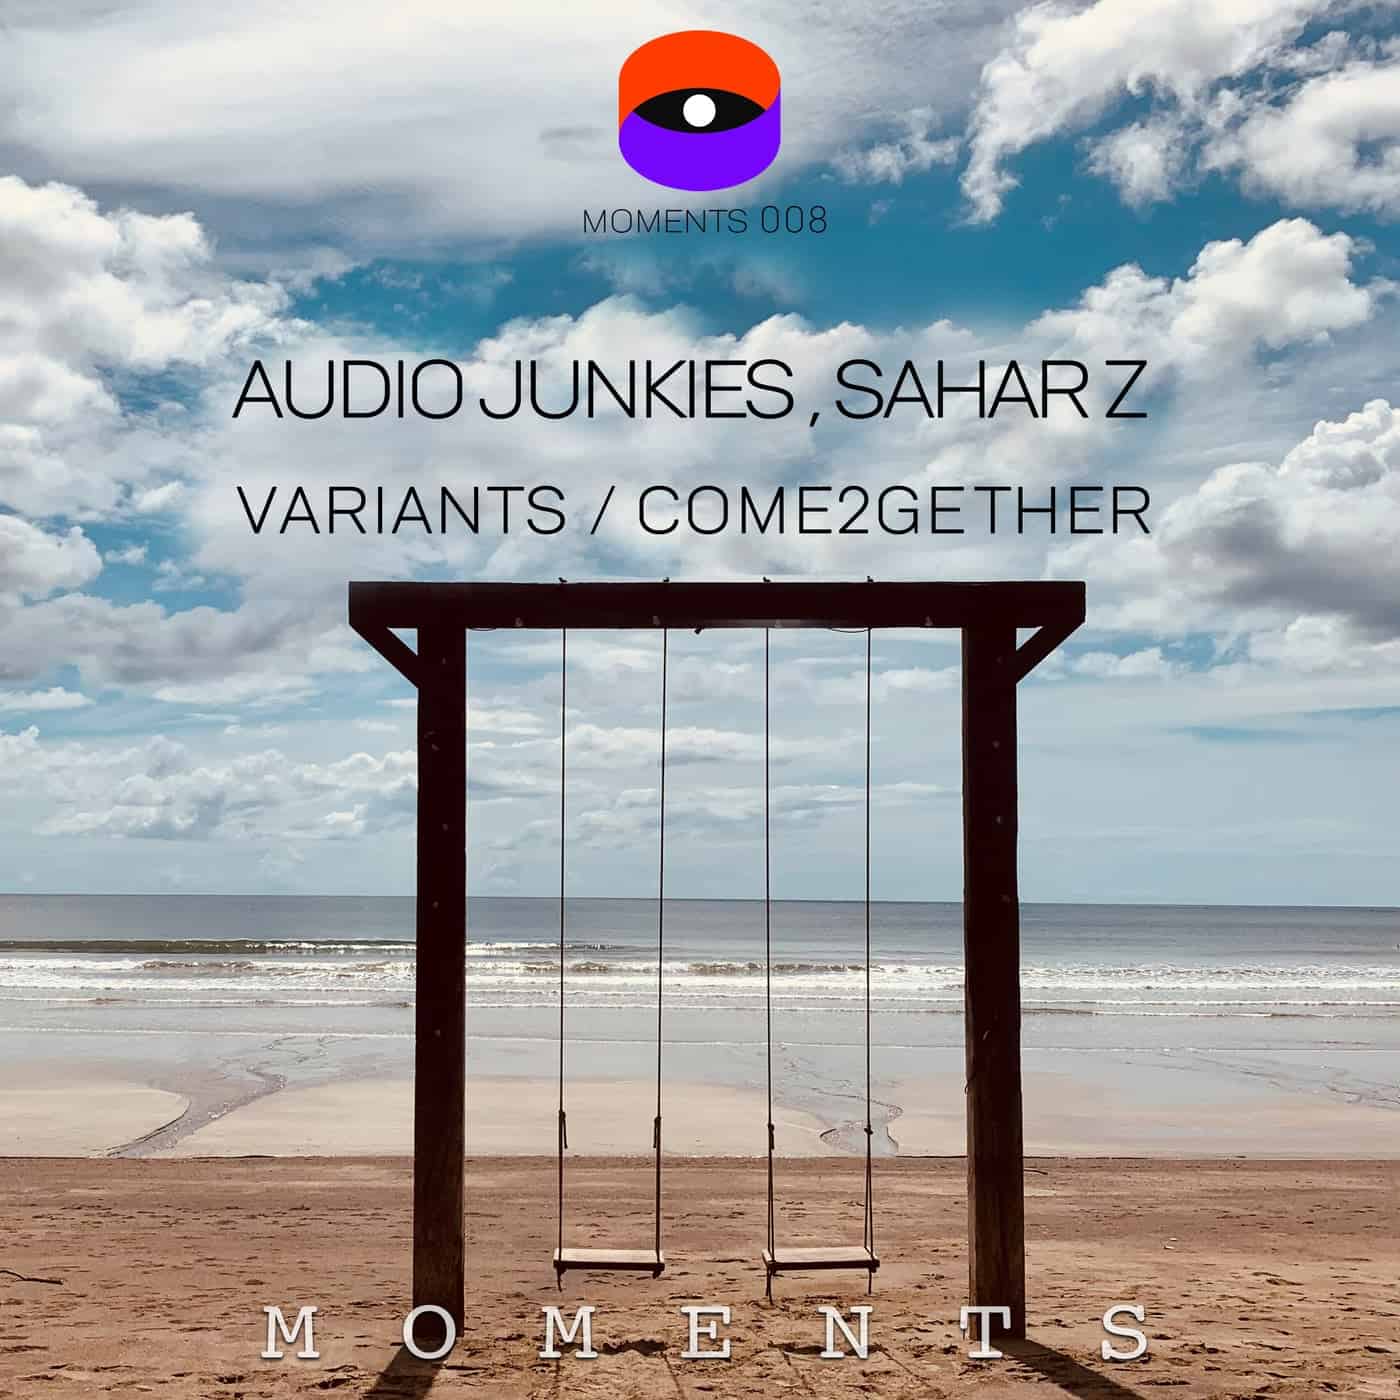 image cover: Sahar Z, Audio Junkies - Variants / Come2gether / MOMENTS008